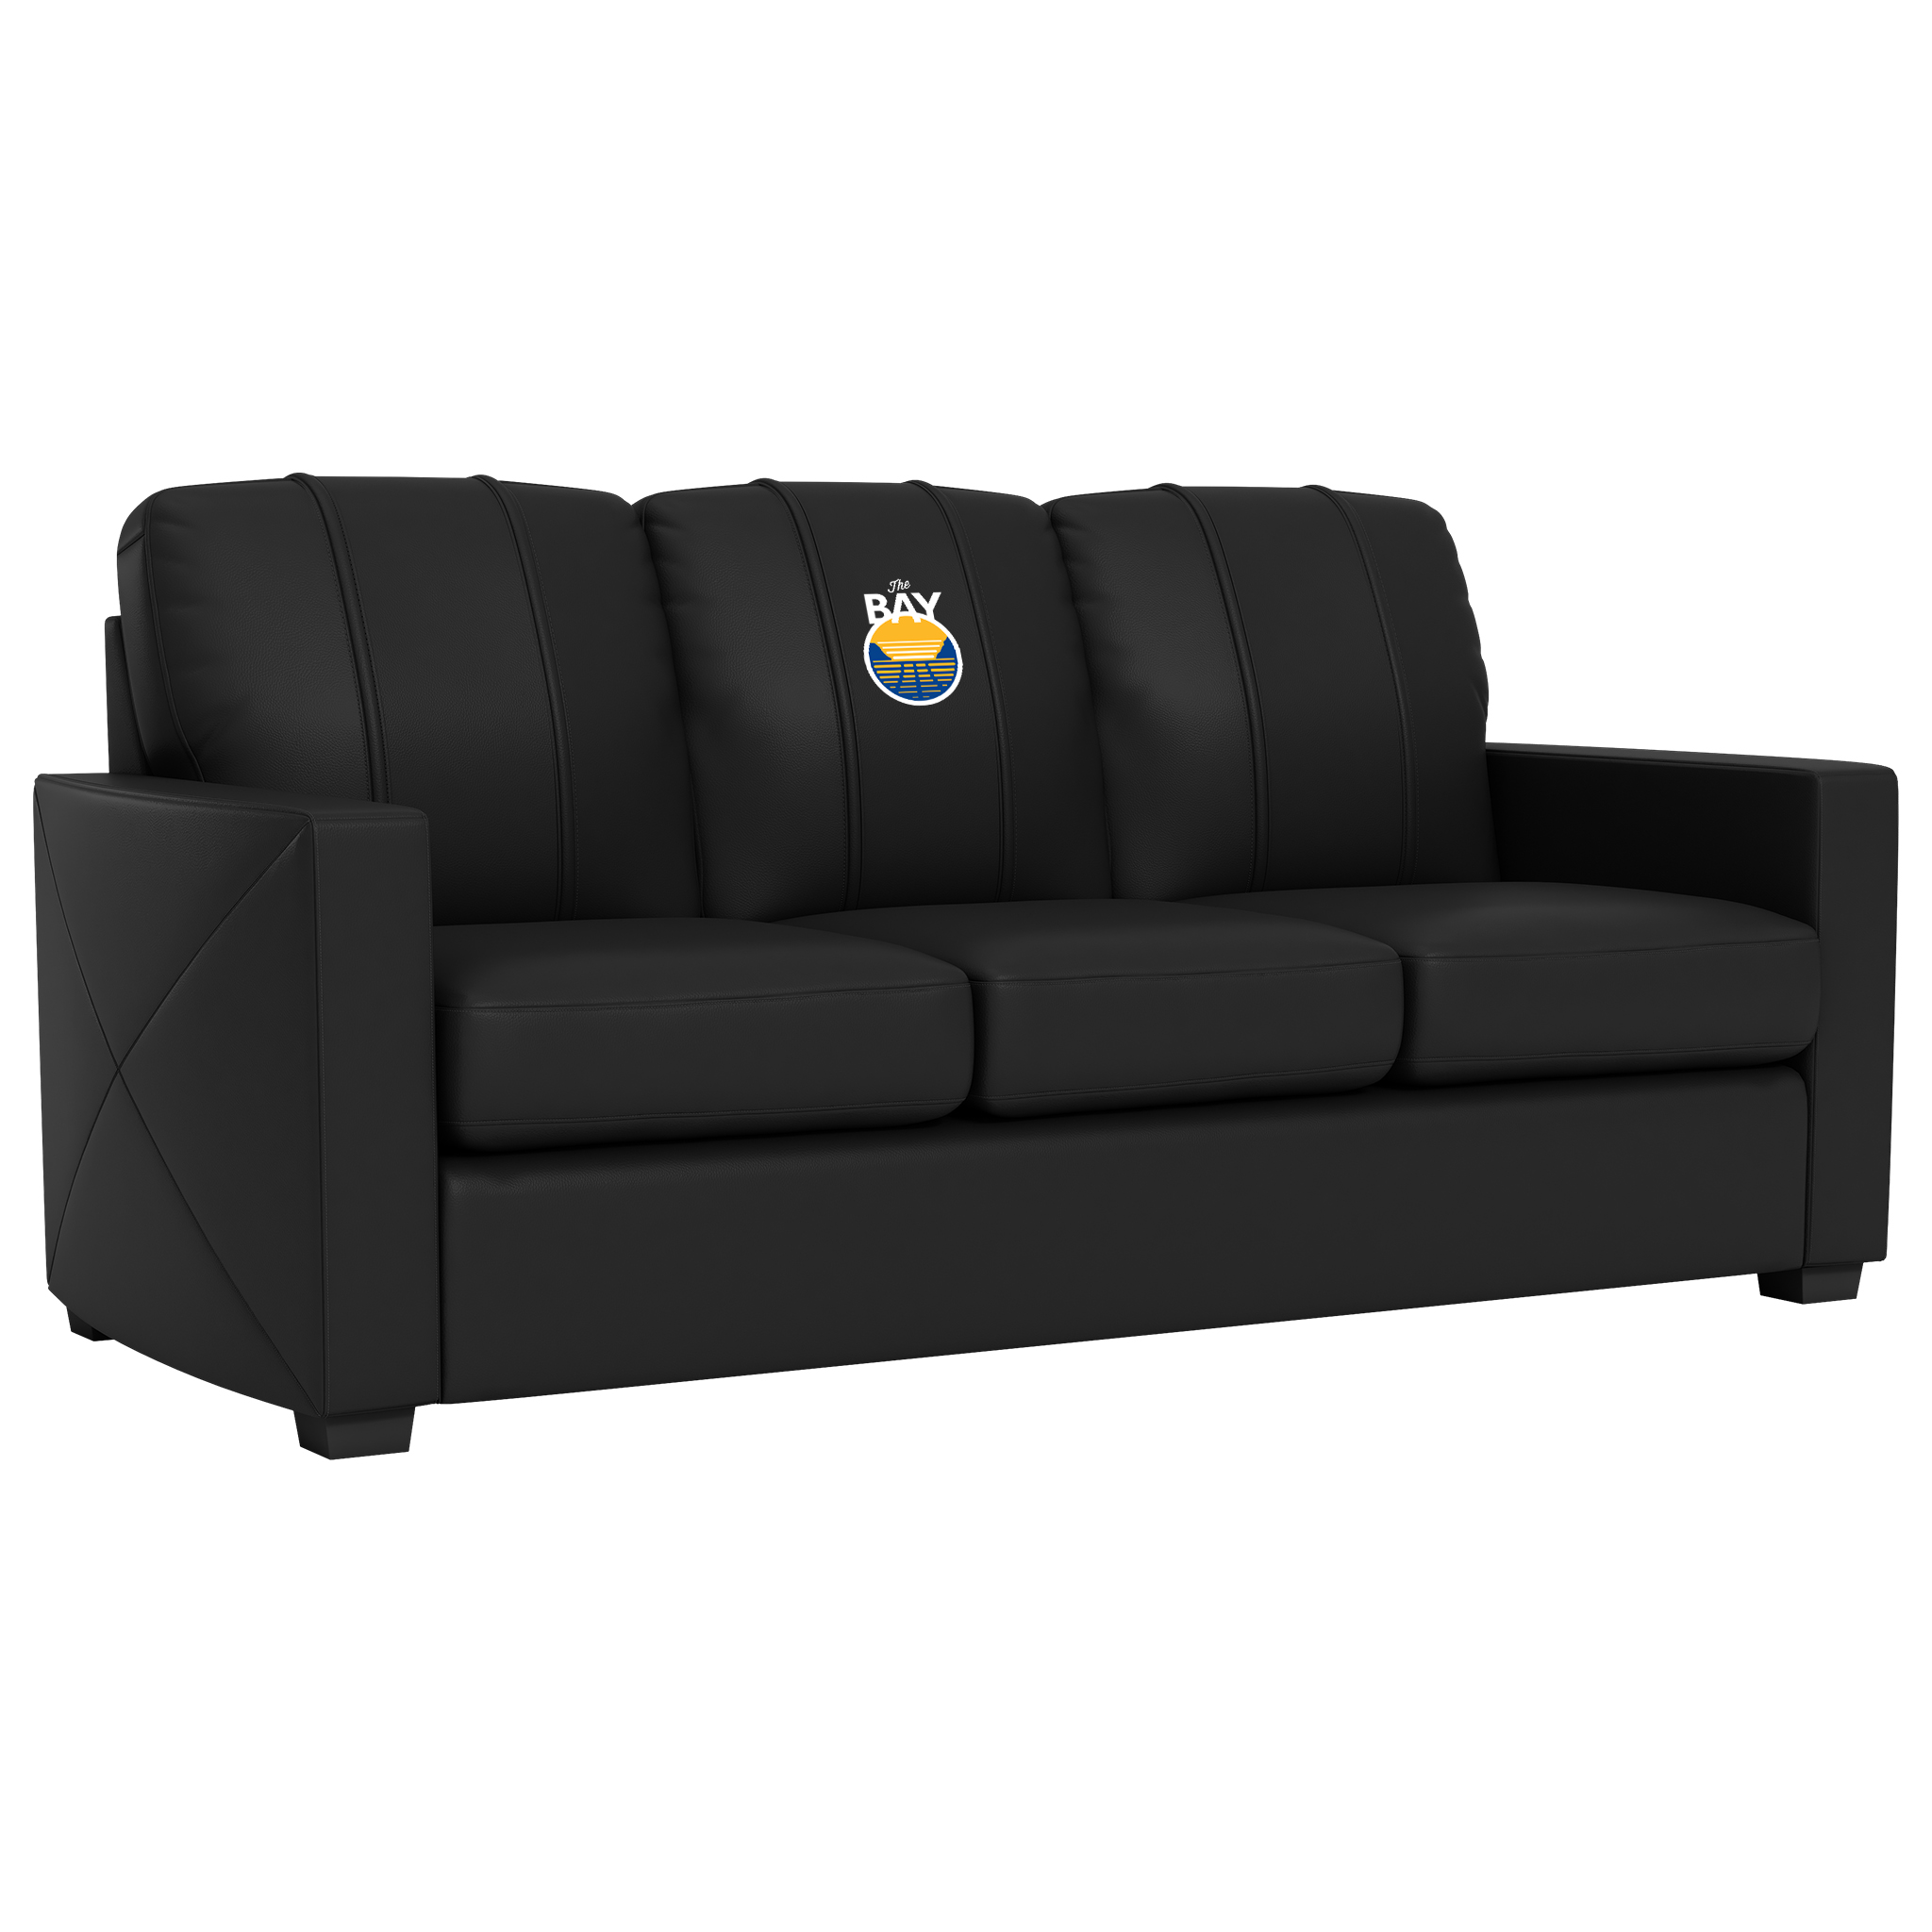 Golden State Warriors Silver Sofa with Golden State Warriors Secondary Logo